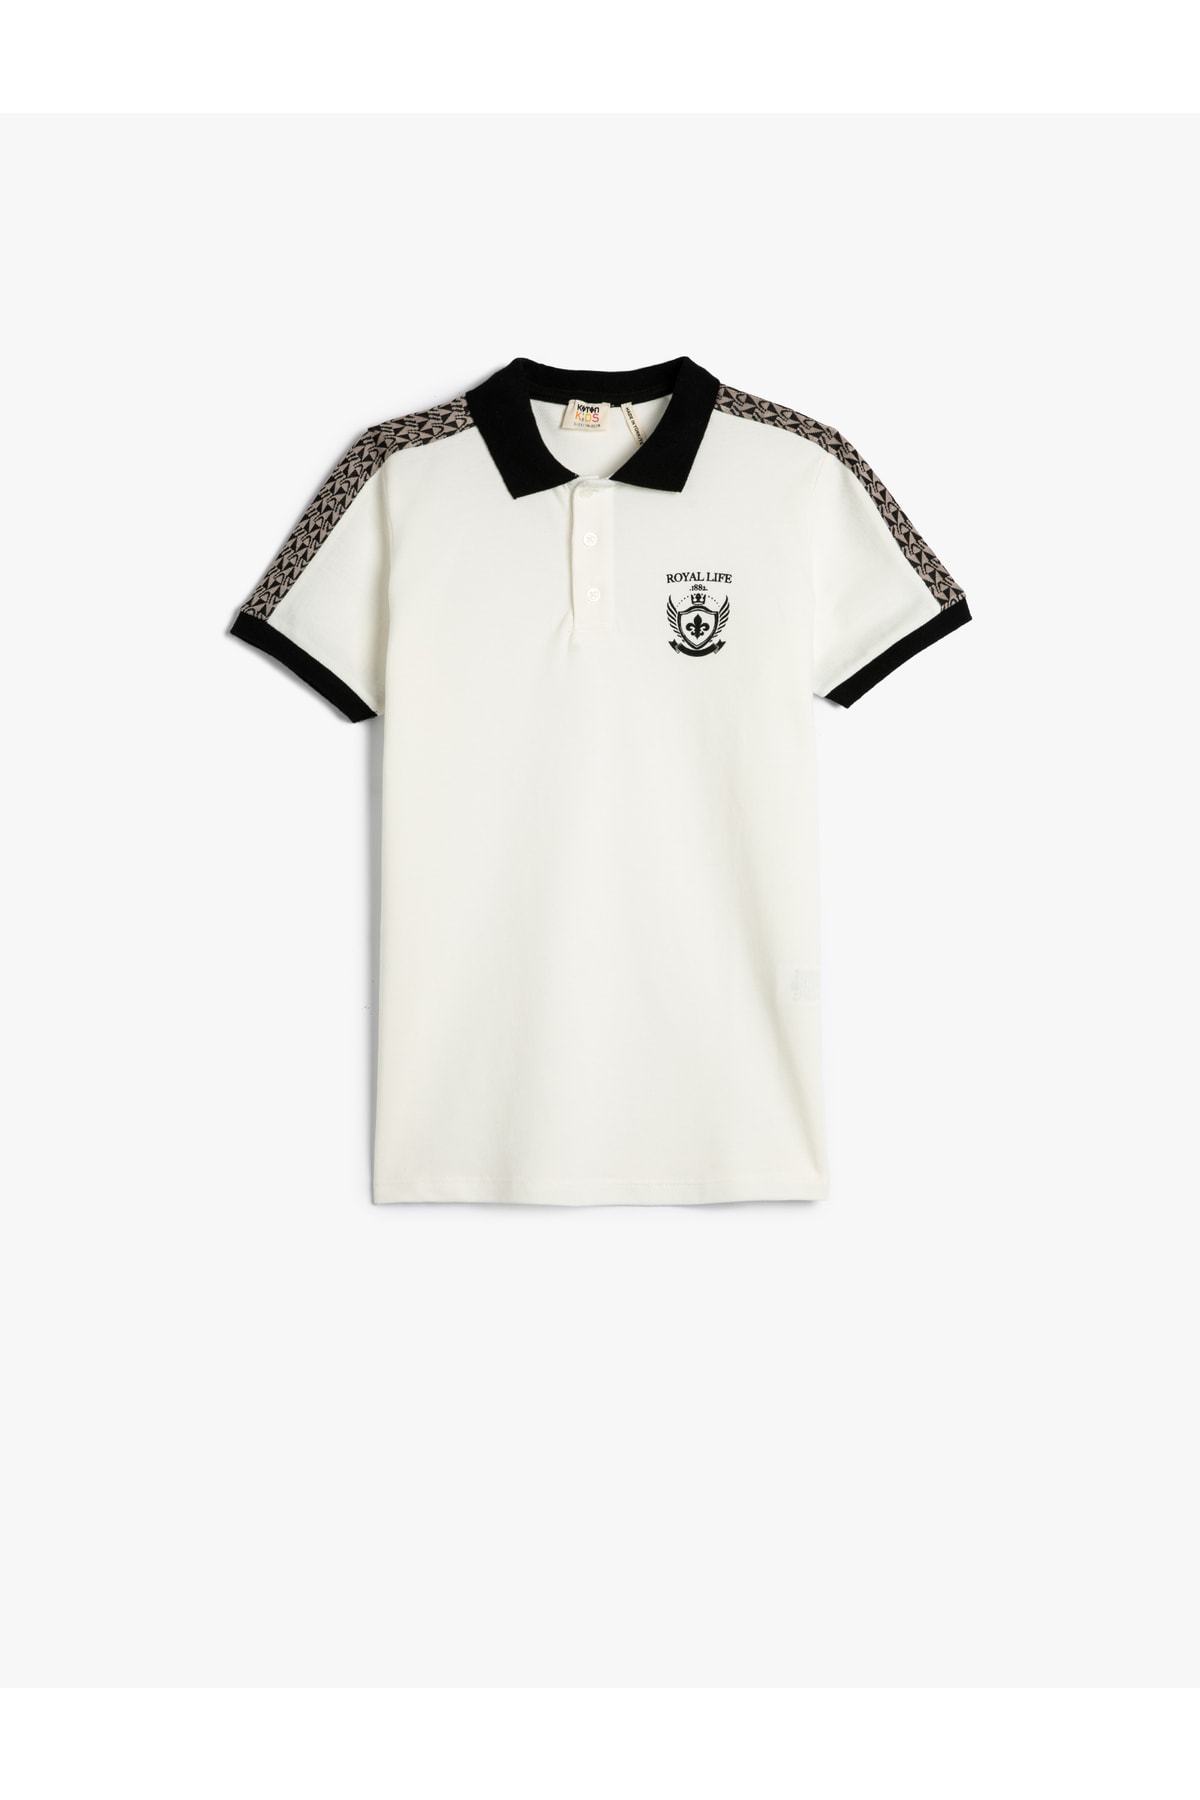 Levně Koton Short Sleeve Polo T-Shirt with Buttons and Stripe Detail.